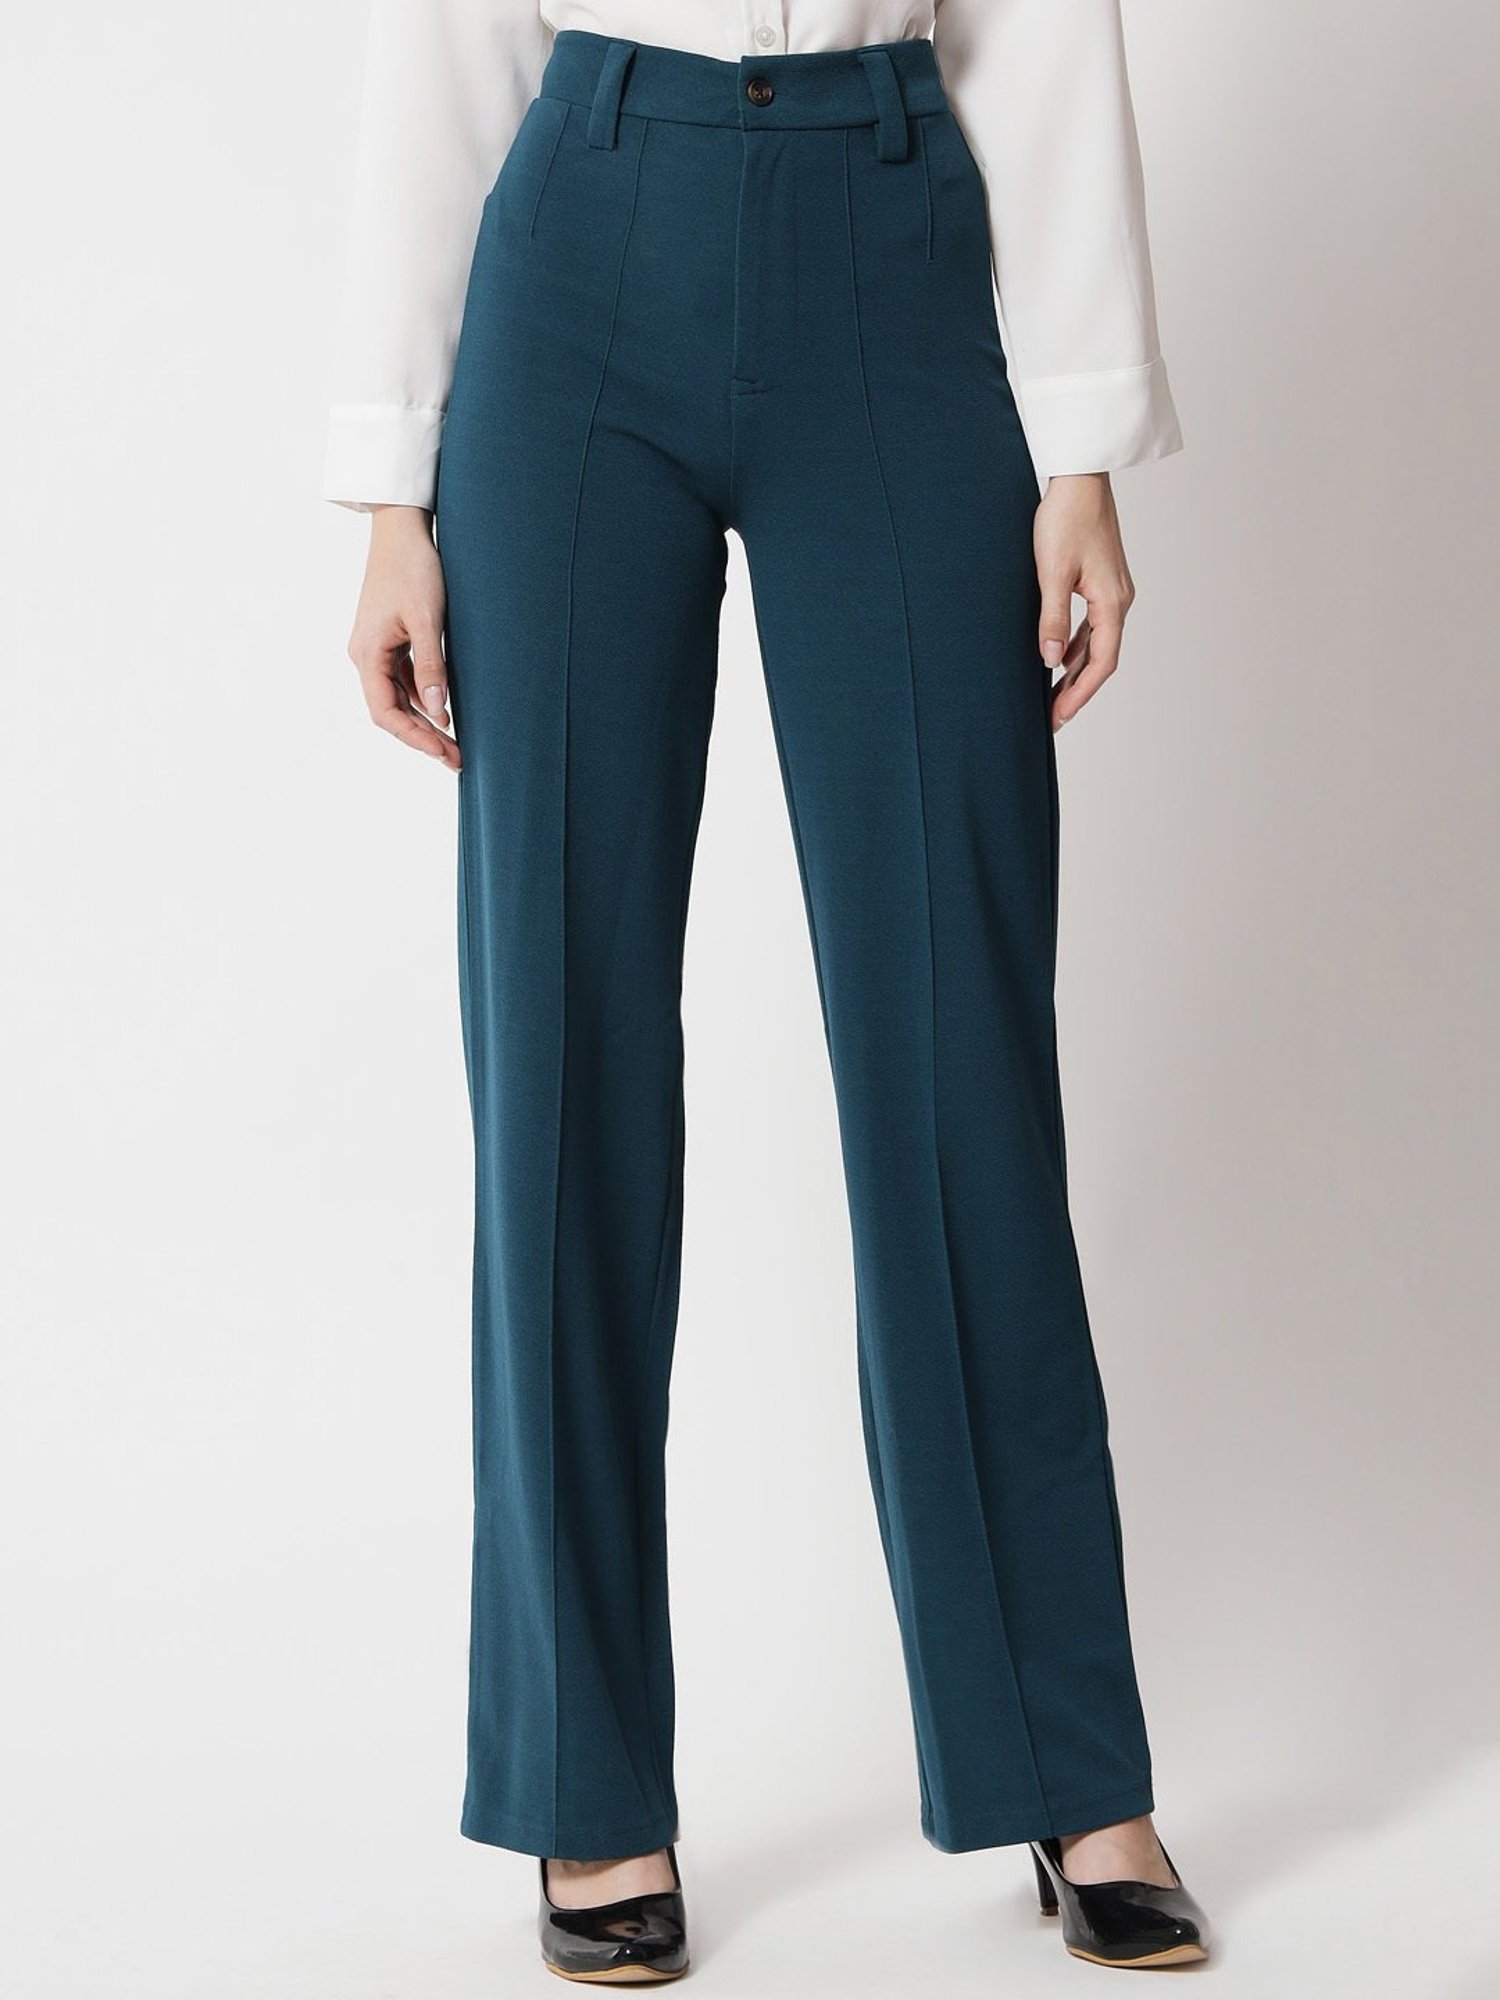 High waisted trousers with wide leg for women at NA-KD | NA-KD